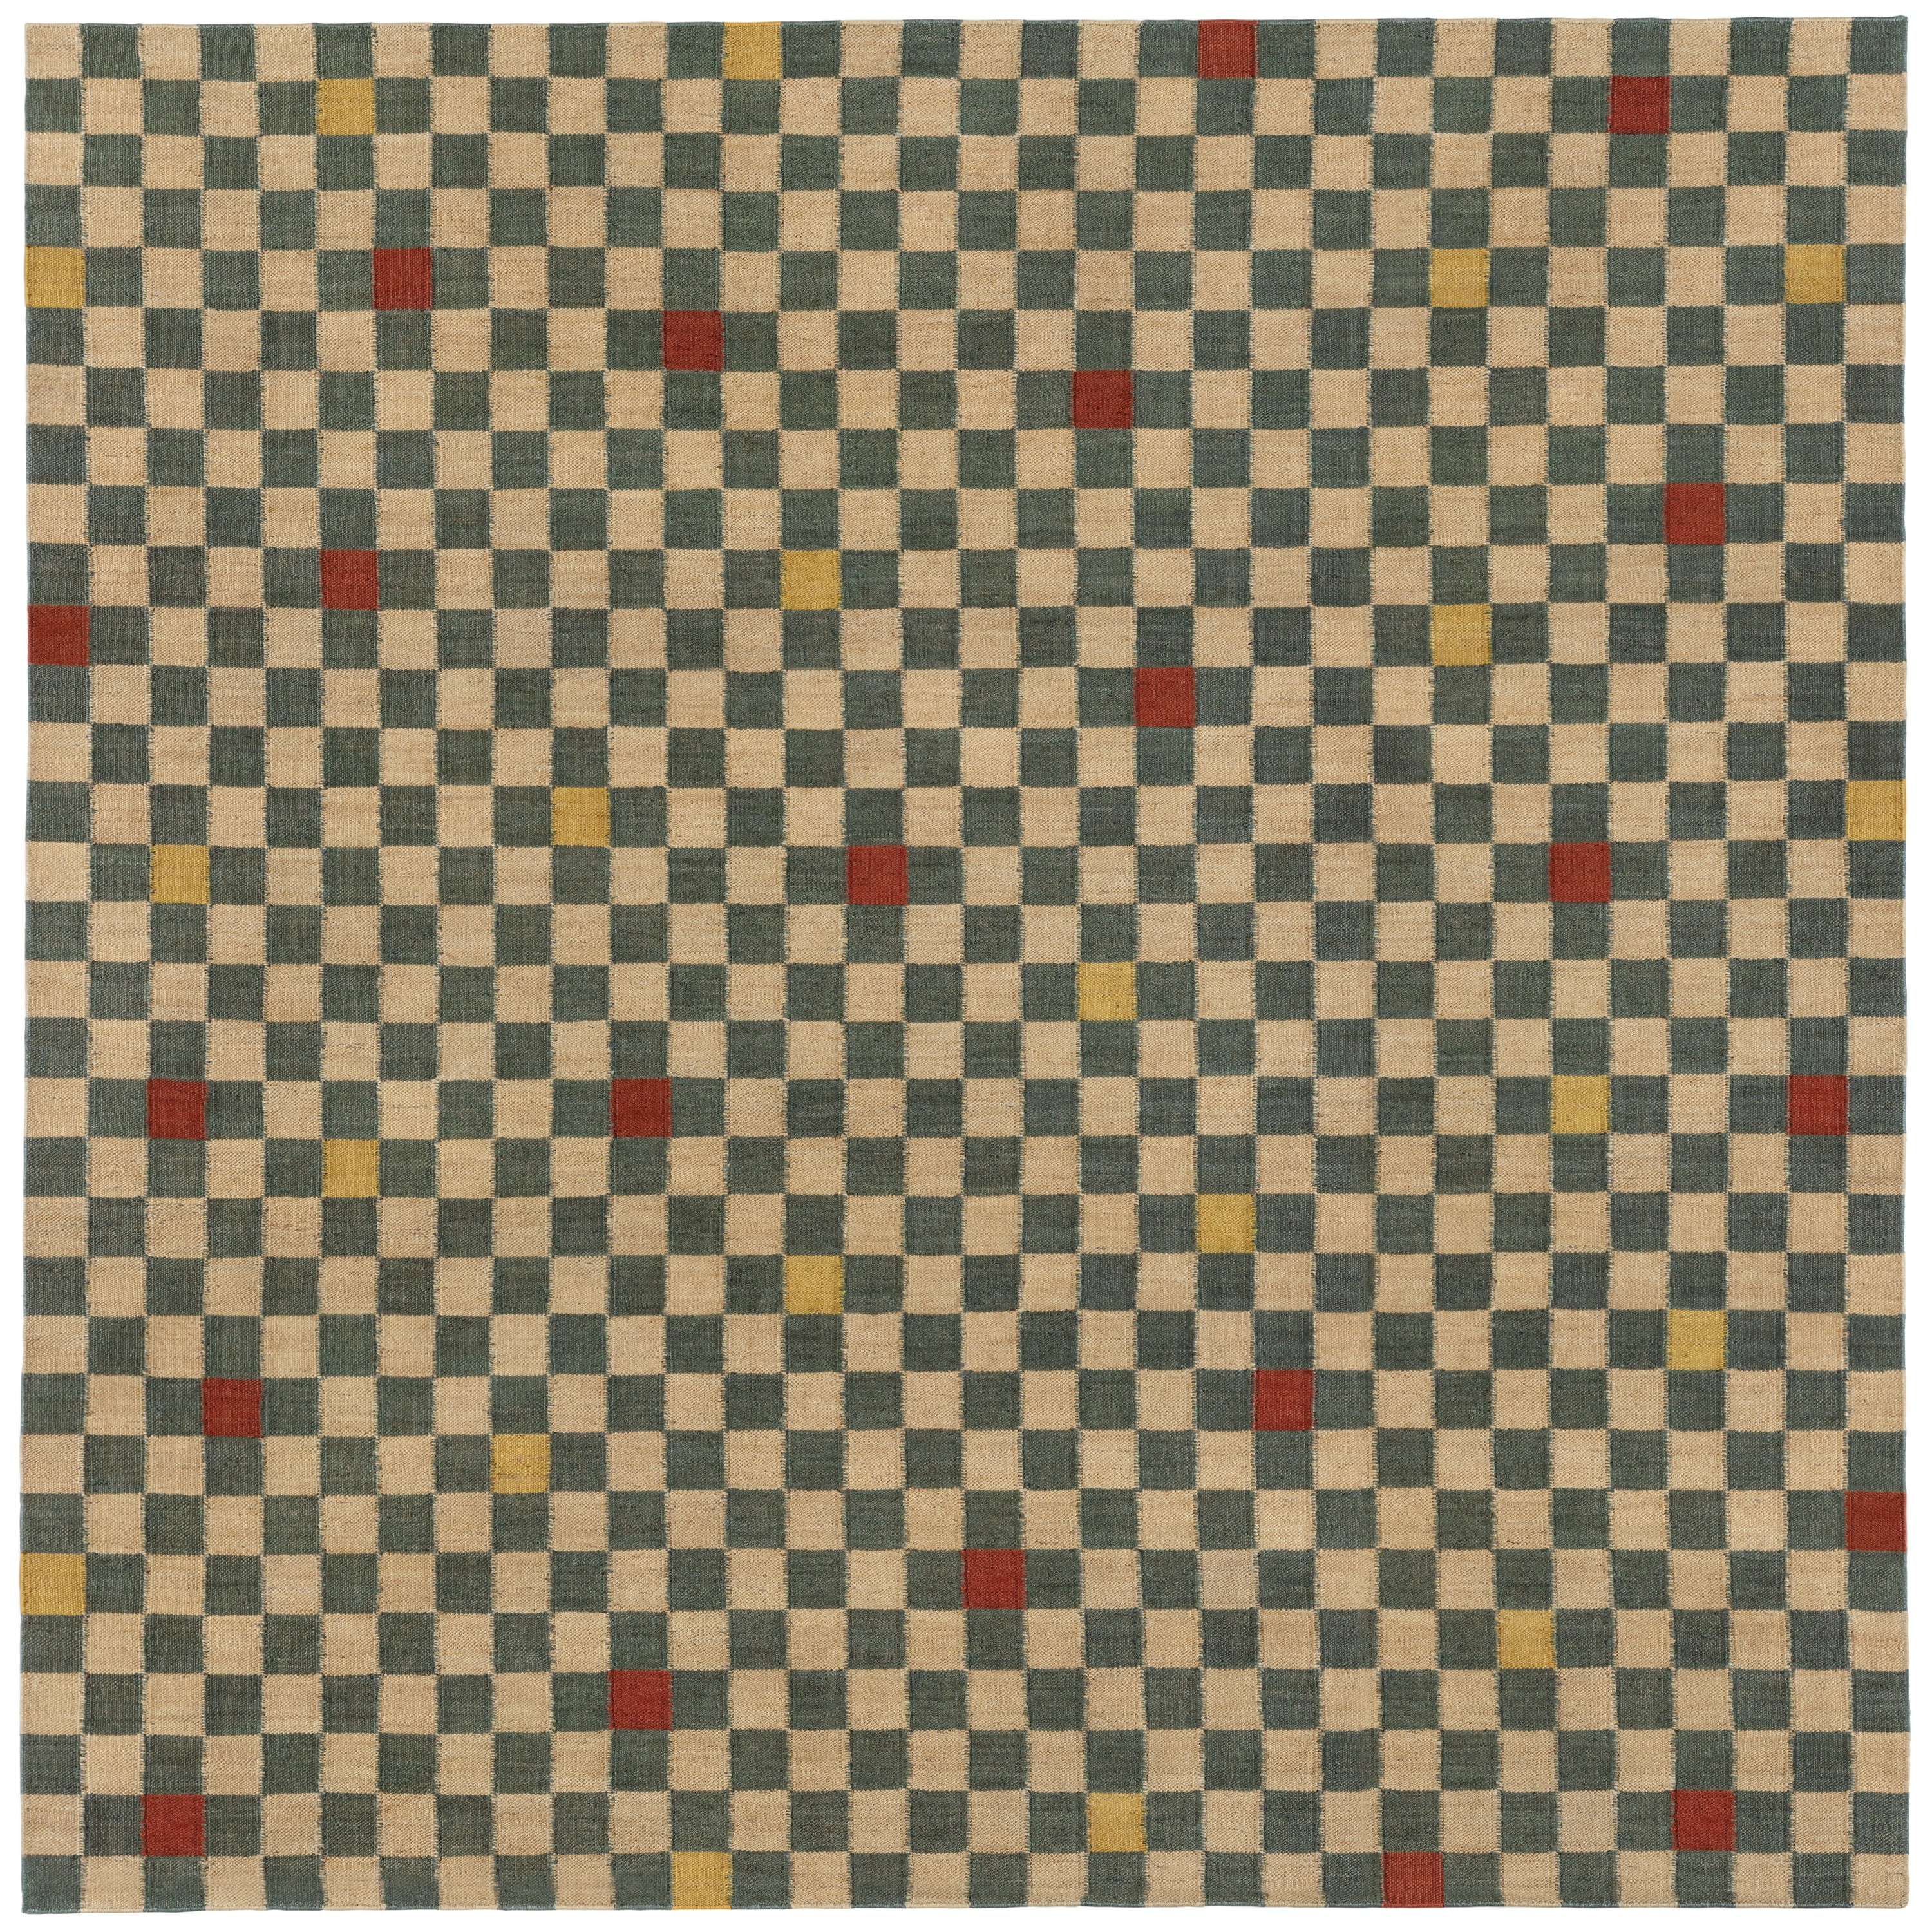 Full size Checkerboard Rug in bishop, a blue and white checkered pattern with random accents of red and yellow.